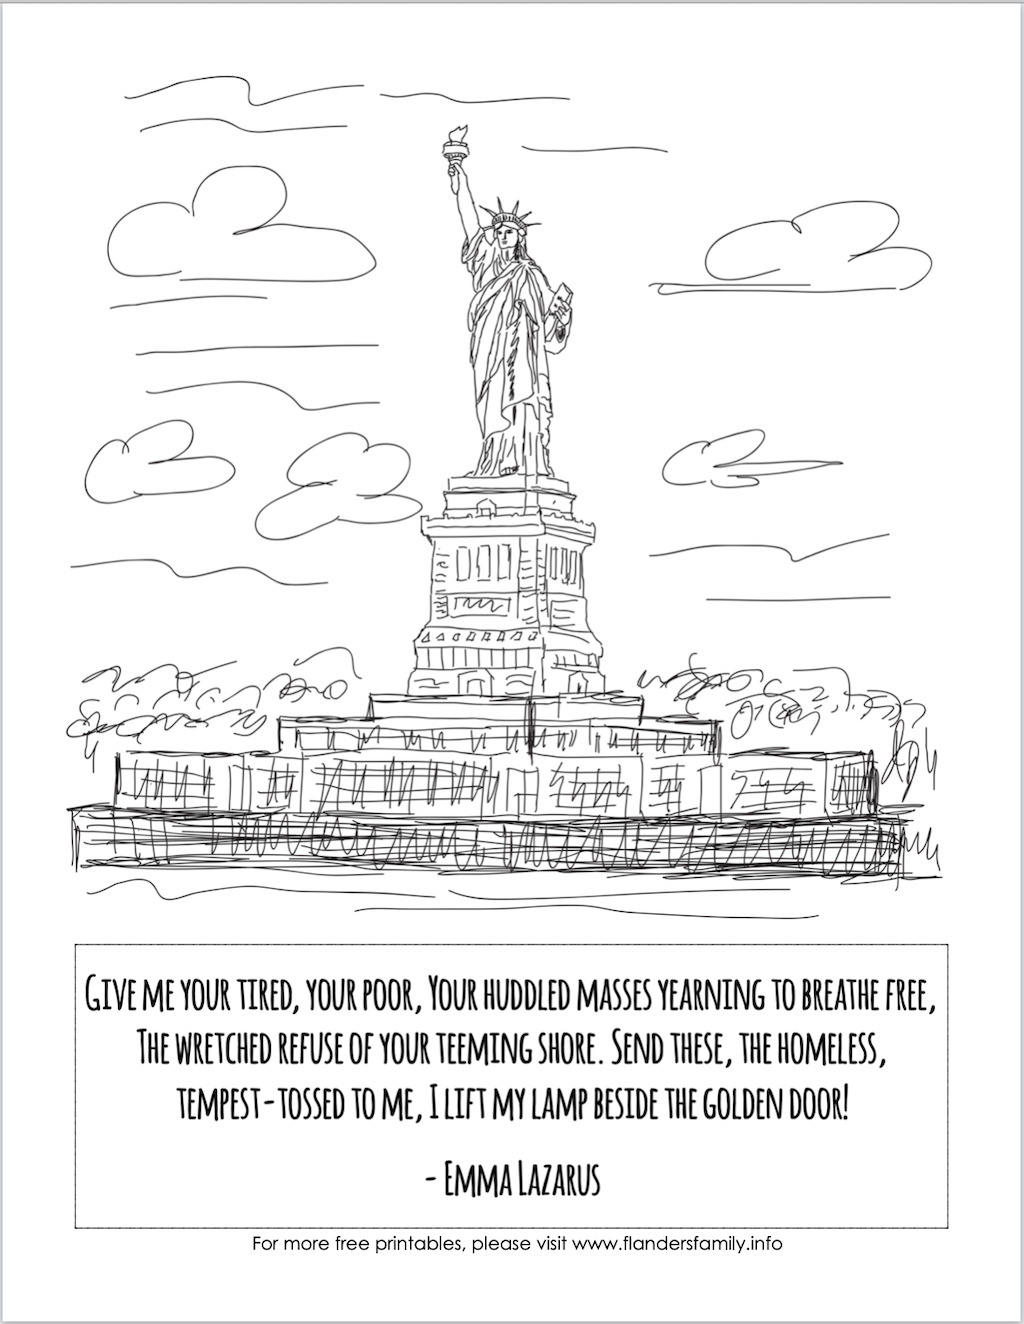 Statue of Liberty Coloring Page